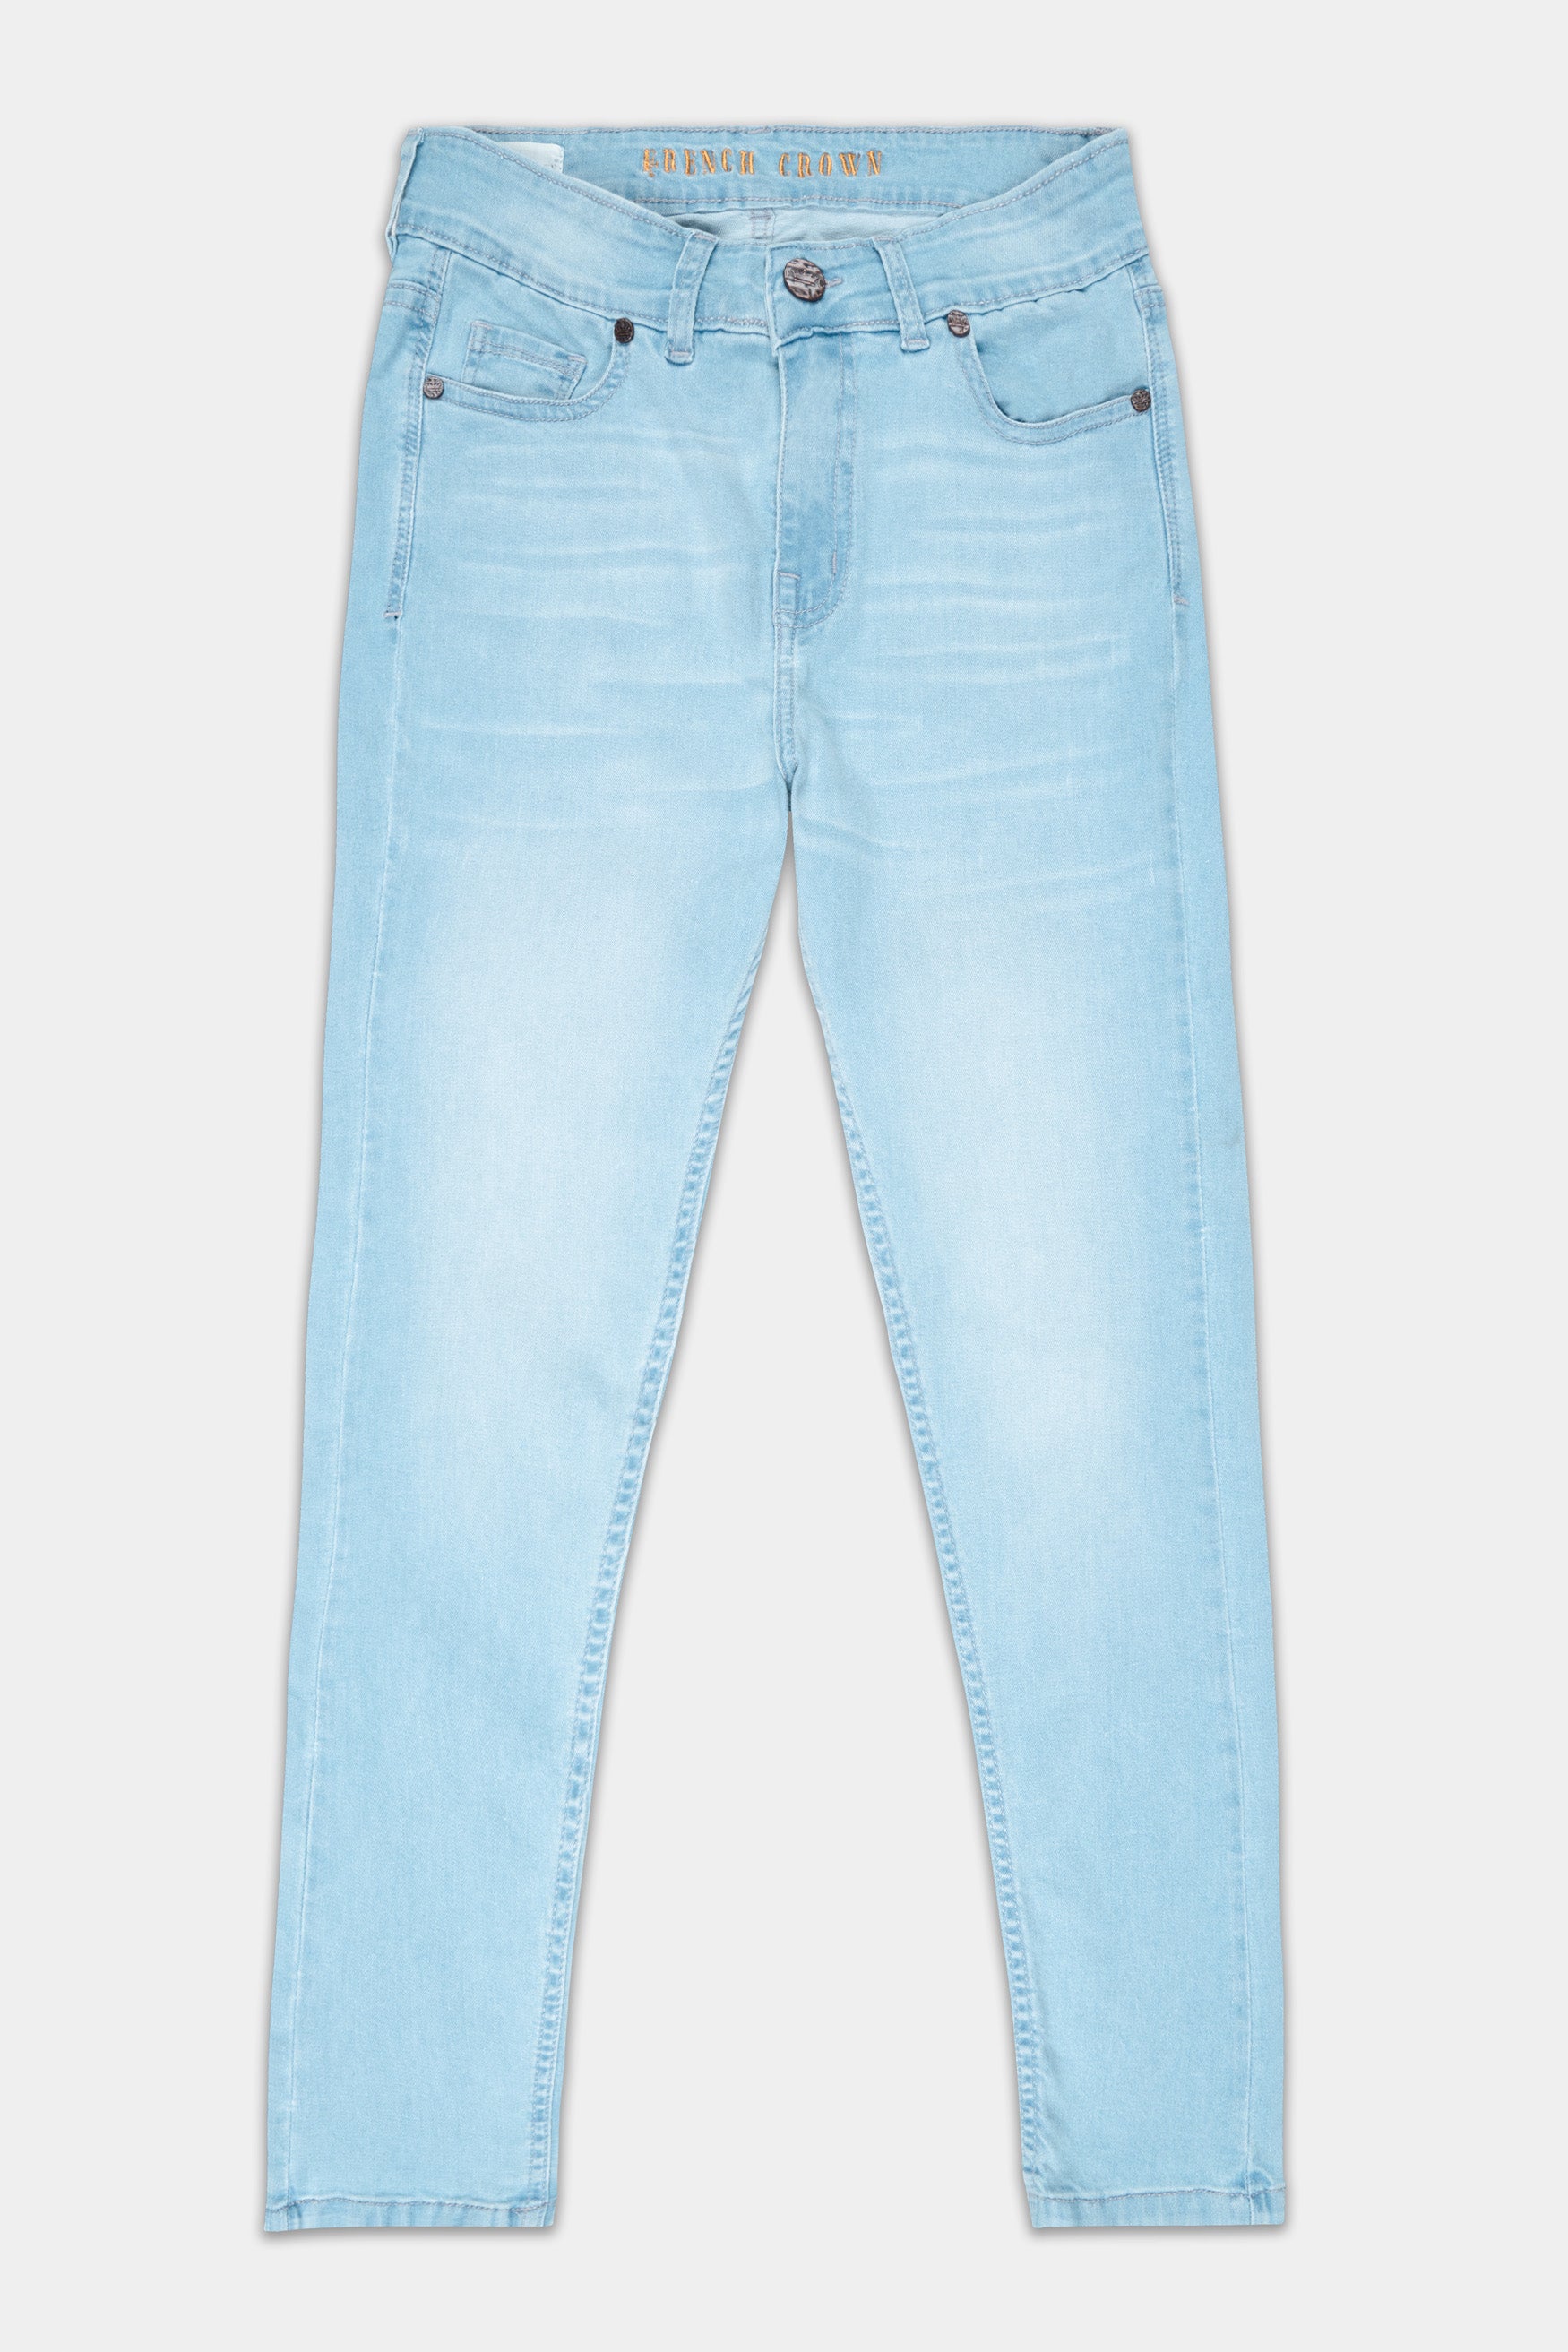 Women's 710 Super Skinny Jeans – Levis India Store